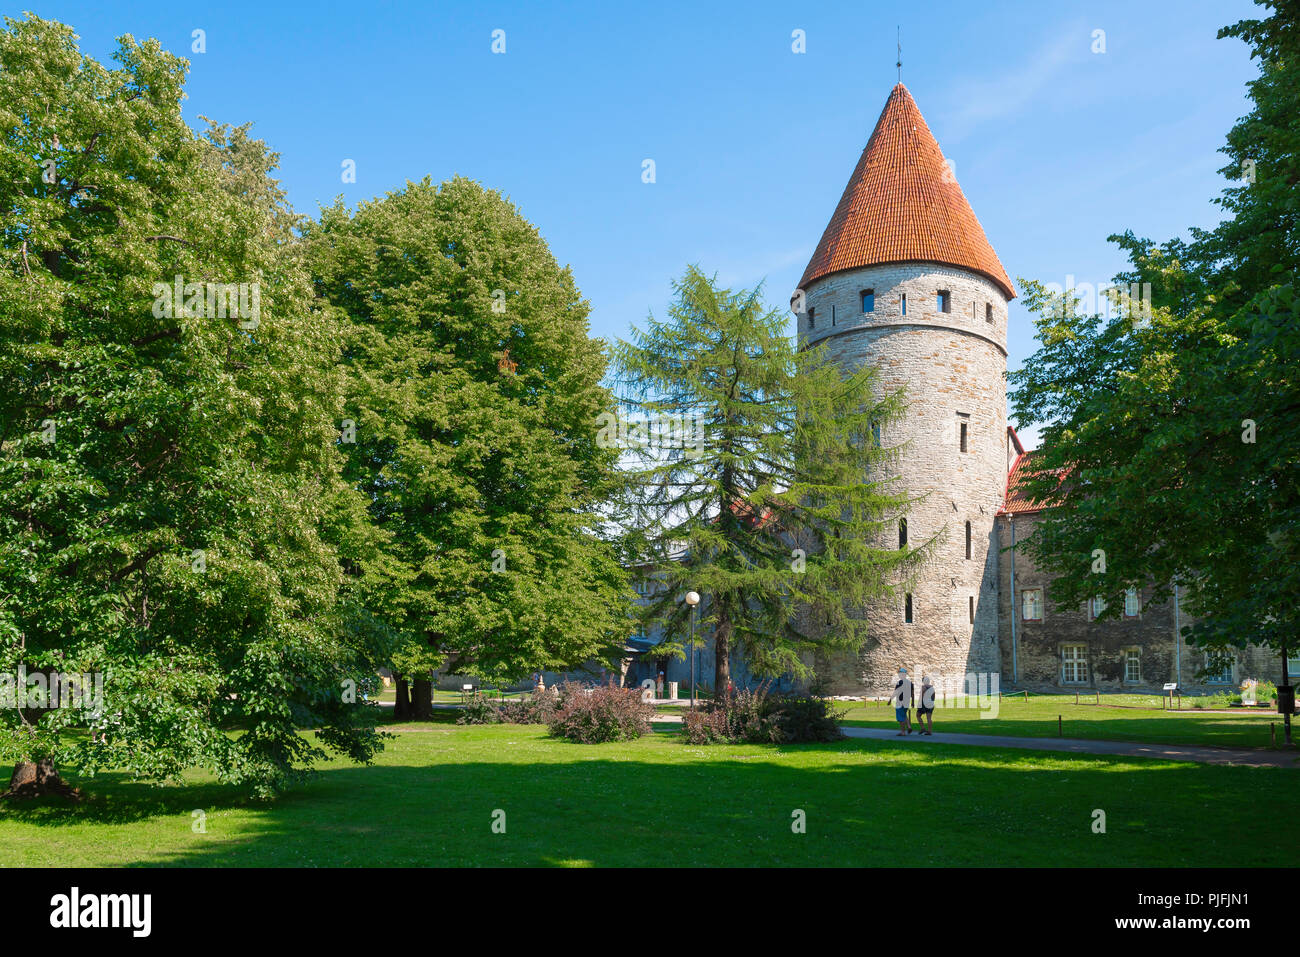 Tallinn park garden, view across the city park and gardens towards one of nine towers linked by the Lower Town Wall in the centre of Tallinn, Estonia. Stock Photo